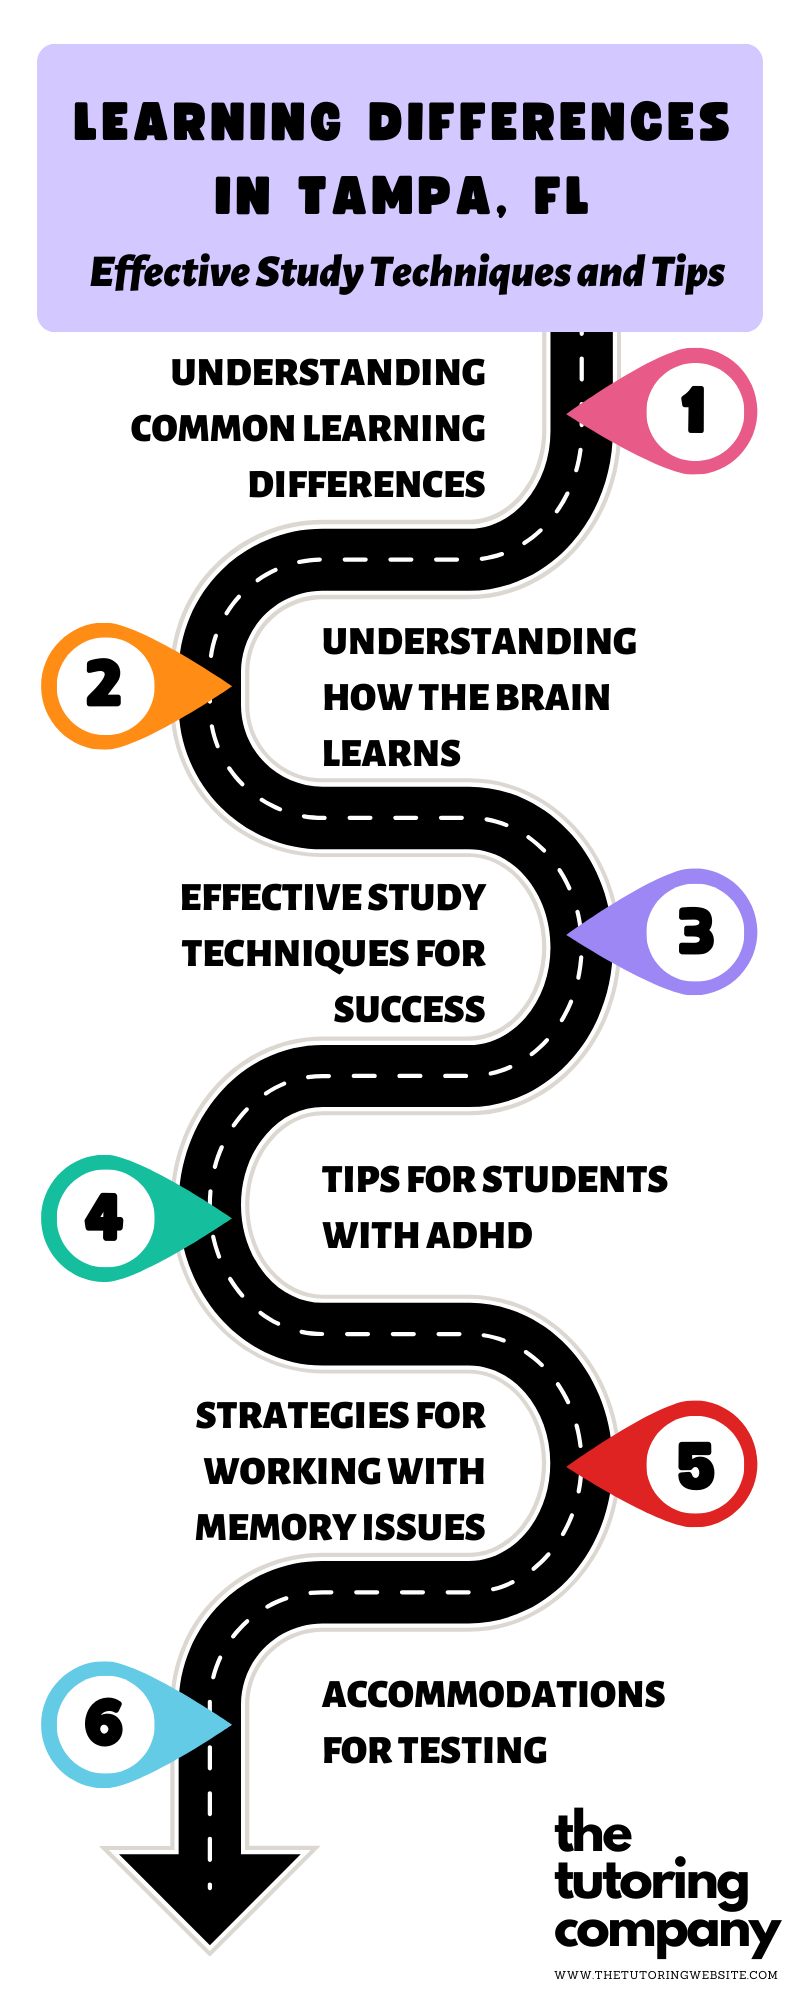 Discover effective strategies to help students with learning differences overcome academic barriers and achieve success in Tampa, FL. The Tutoring Company provides tutors for students with LD, ADHD, dyslexia, dyscalculia, and executive functioning issues.